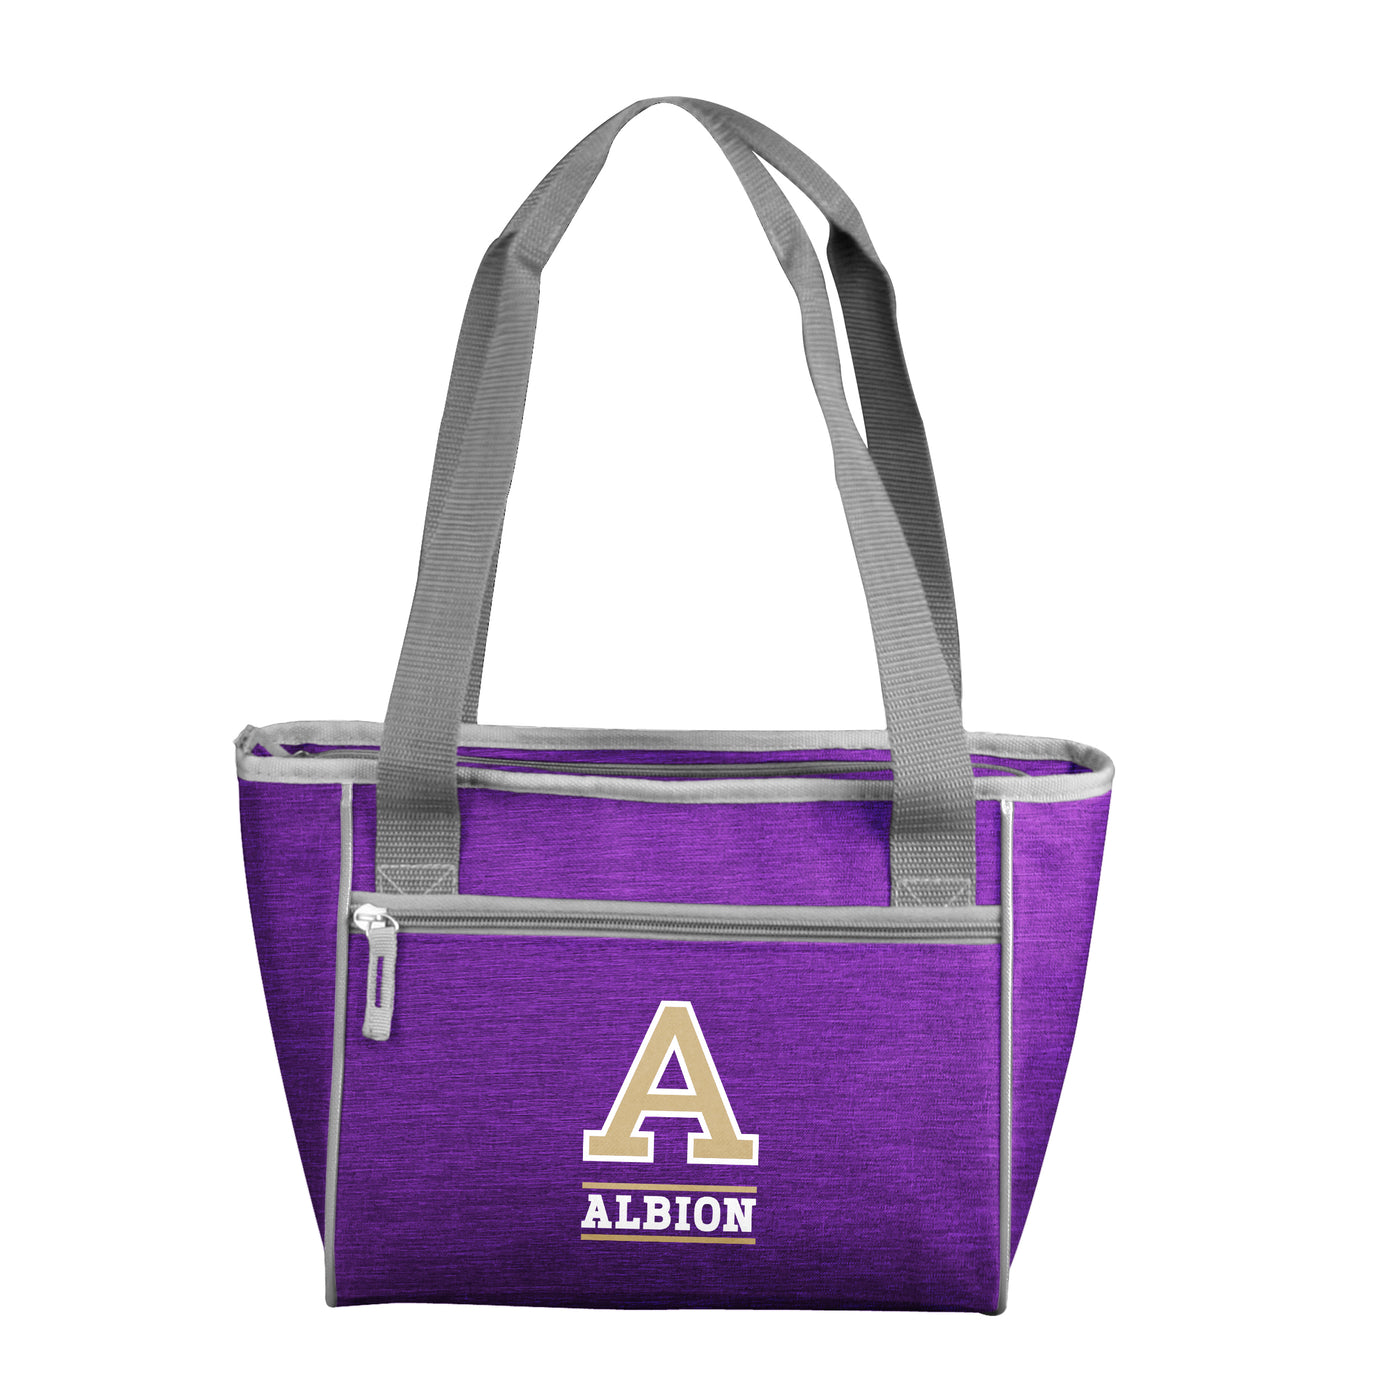 Albion College 16 Can Cooler Tote